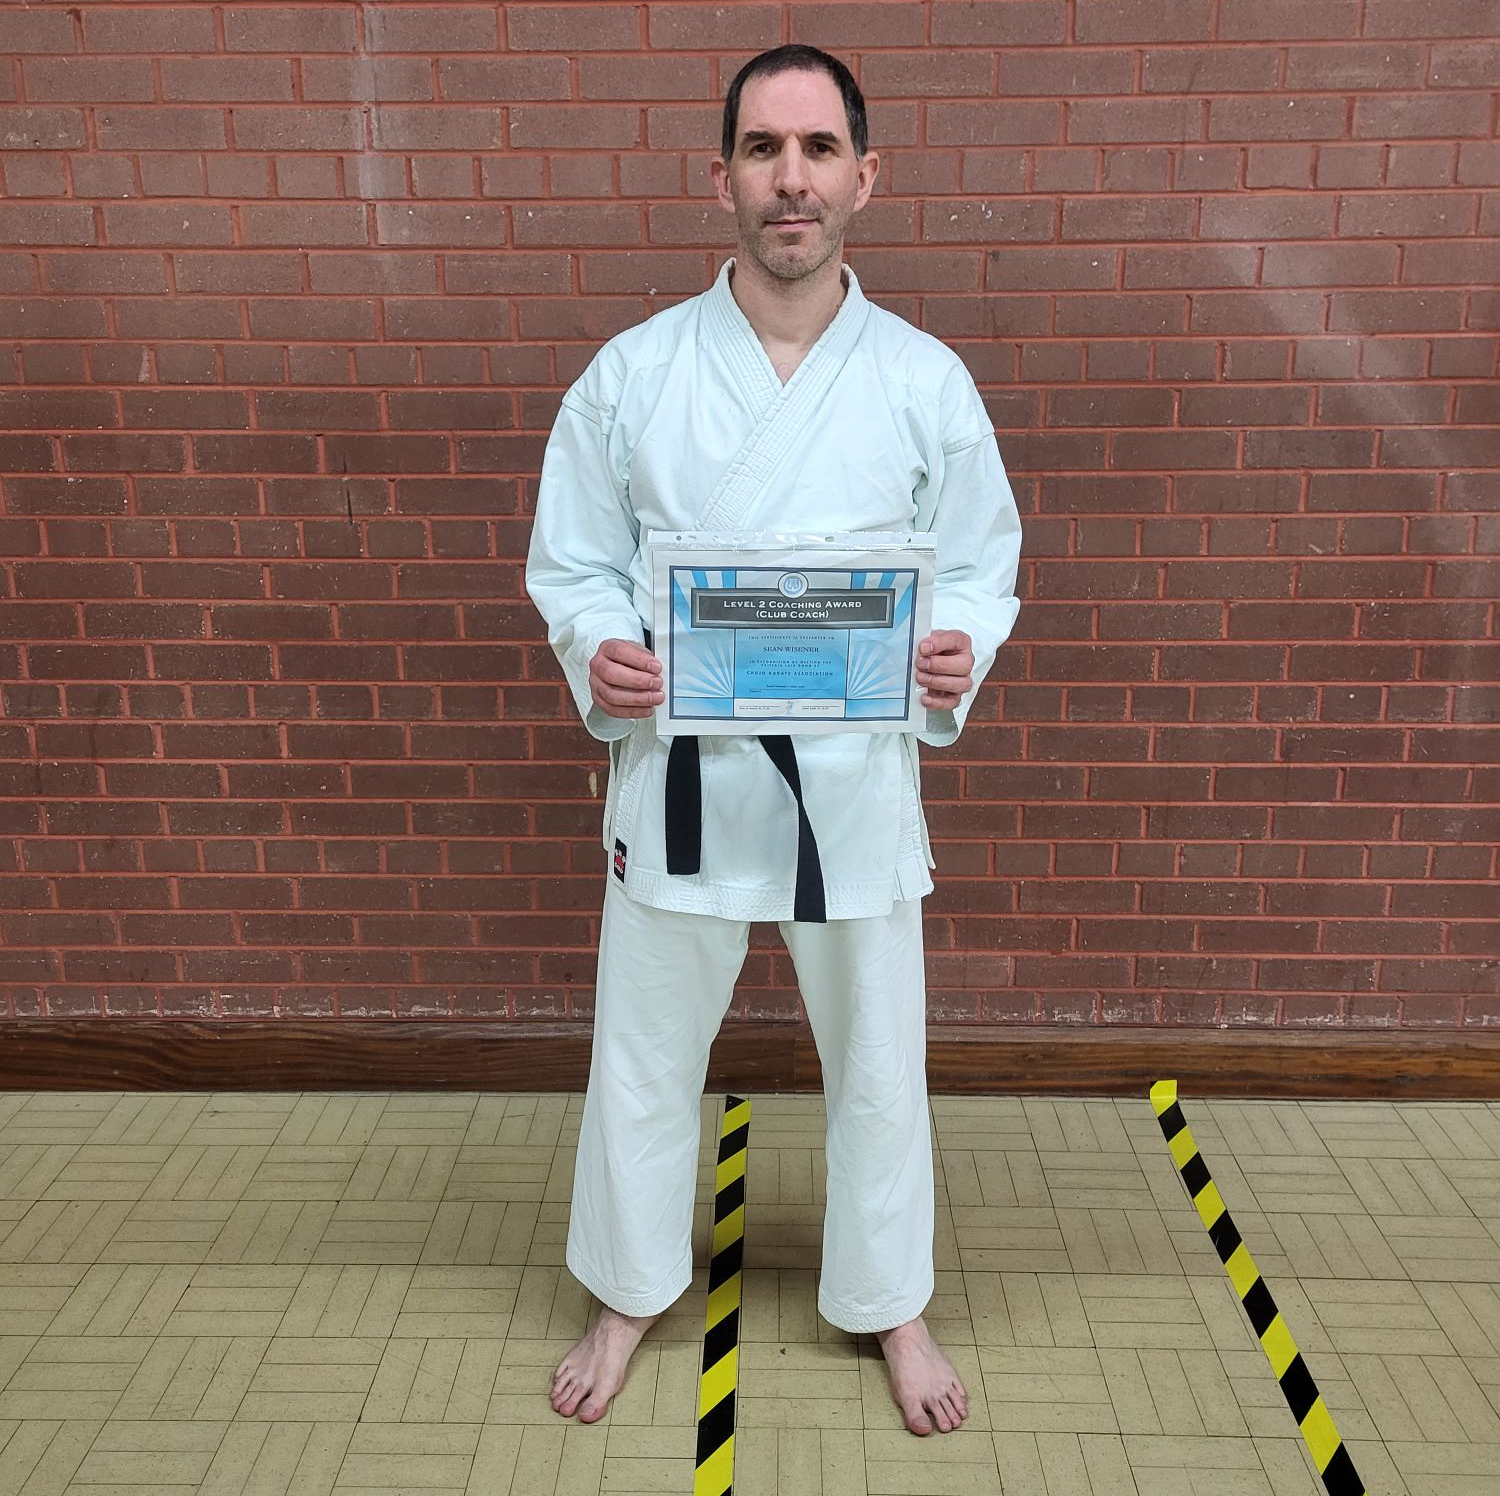 Man in karate suit holding certficate